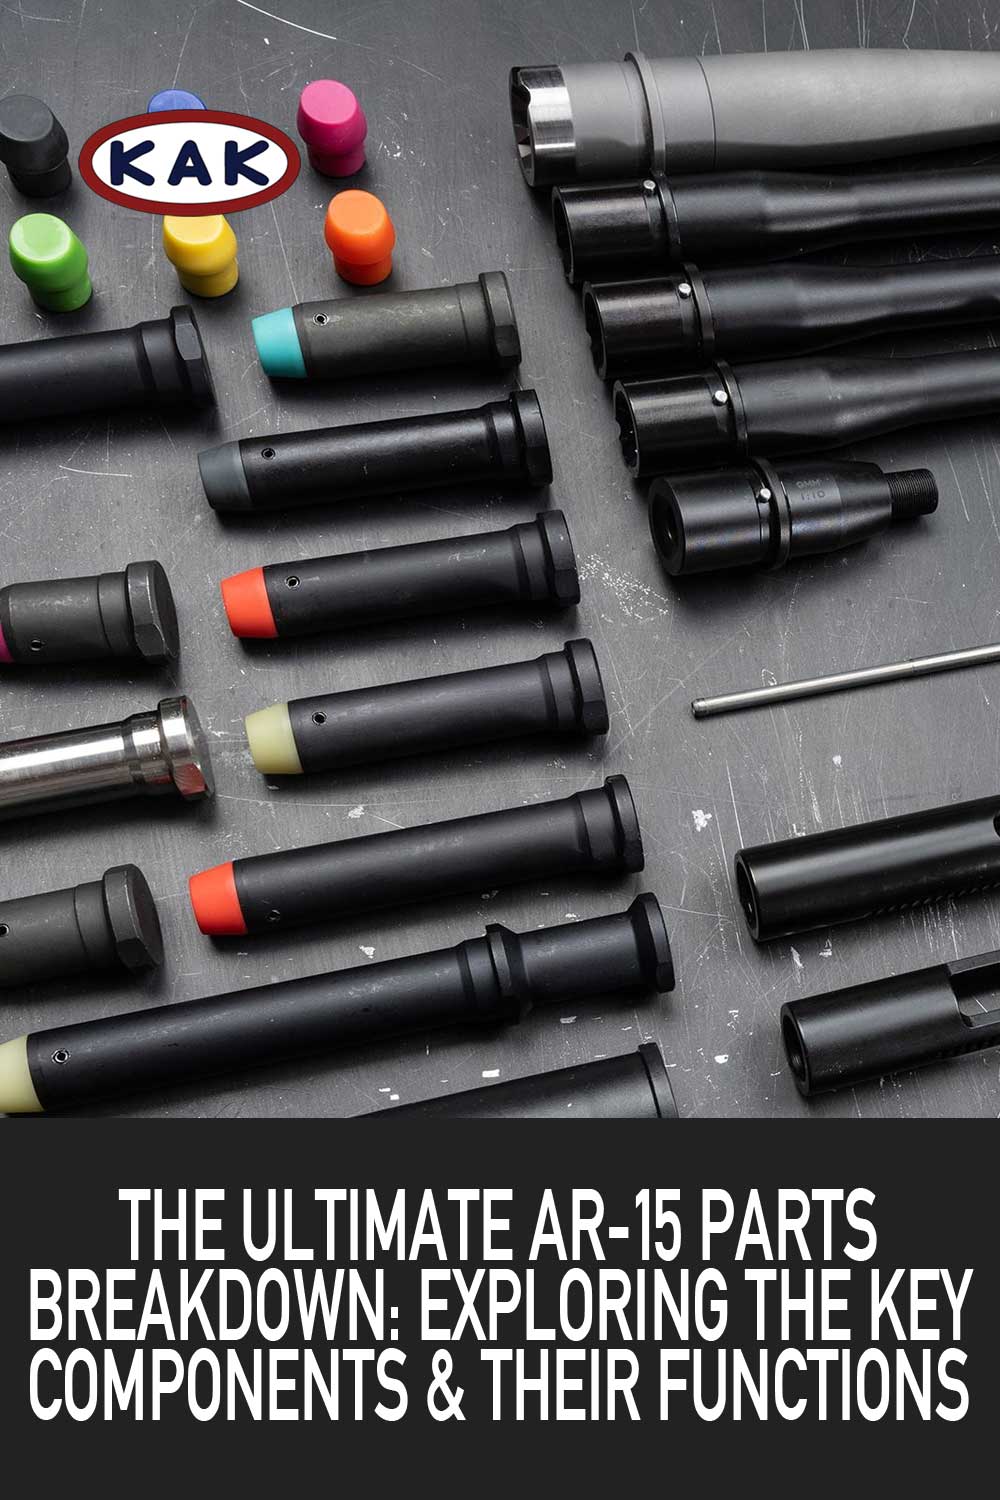 The Ultimate AR-15 Parts Breakdown: Exploring the Key Components and Their Functions